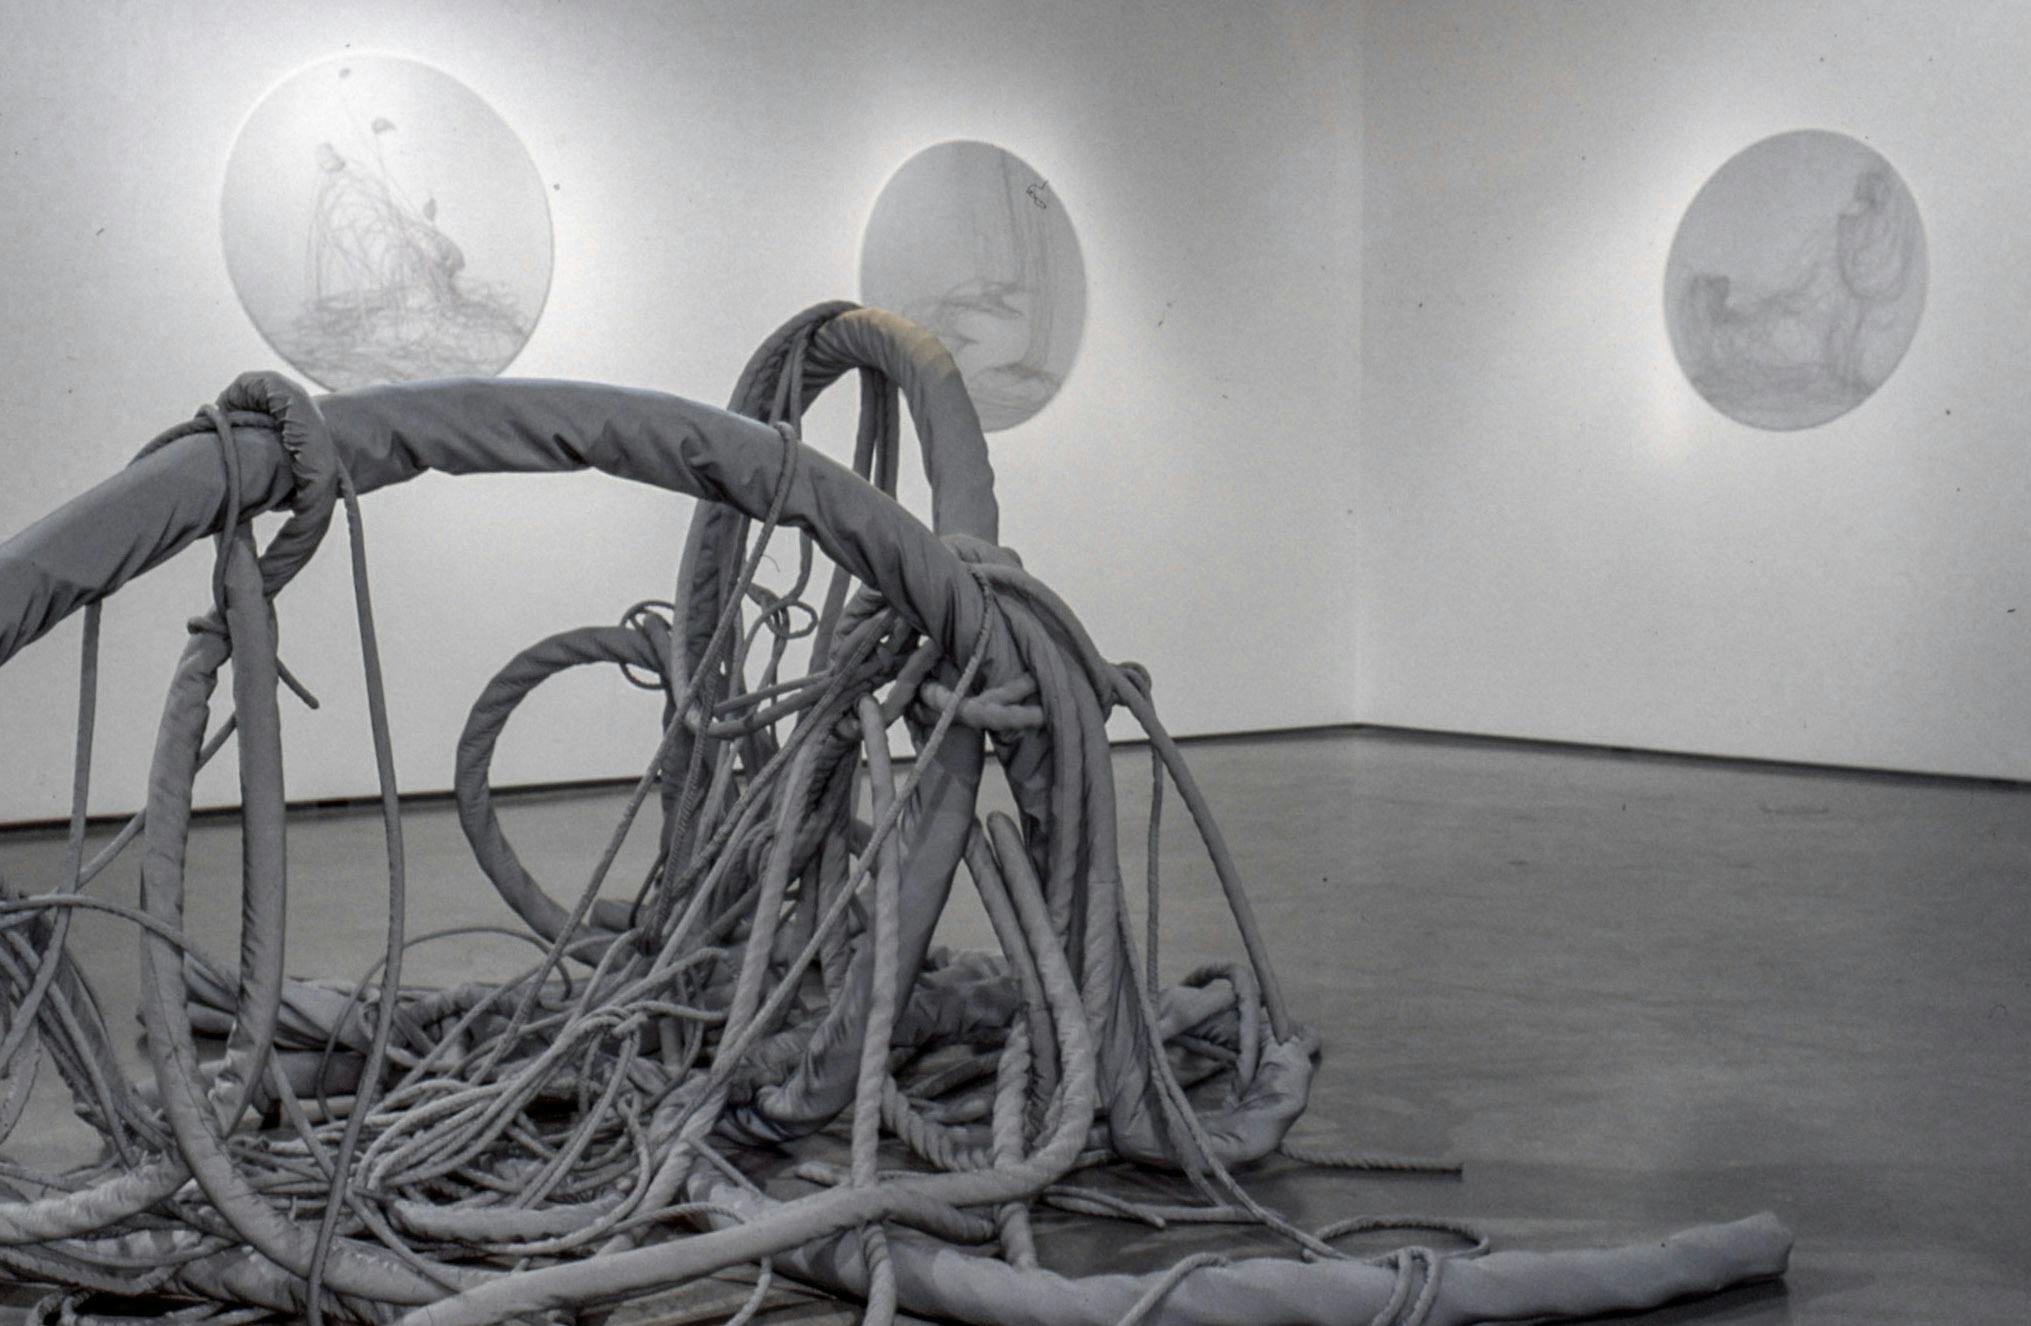 A large grey sculpture that looks like a tangled fishing net is placed in the middle of the gallery floor. Three circular shaped sculptures that resemble white marble are mounted on the walls. 